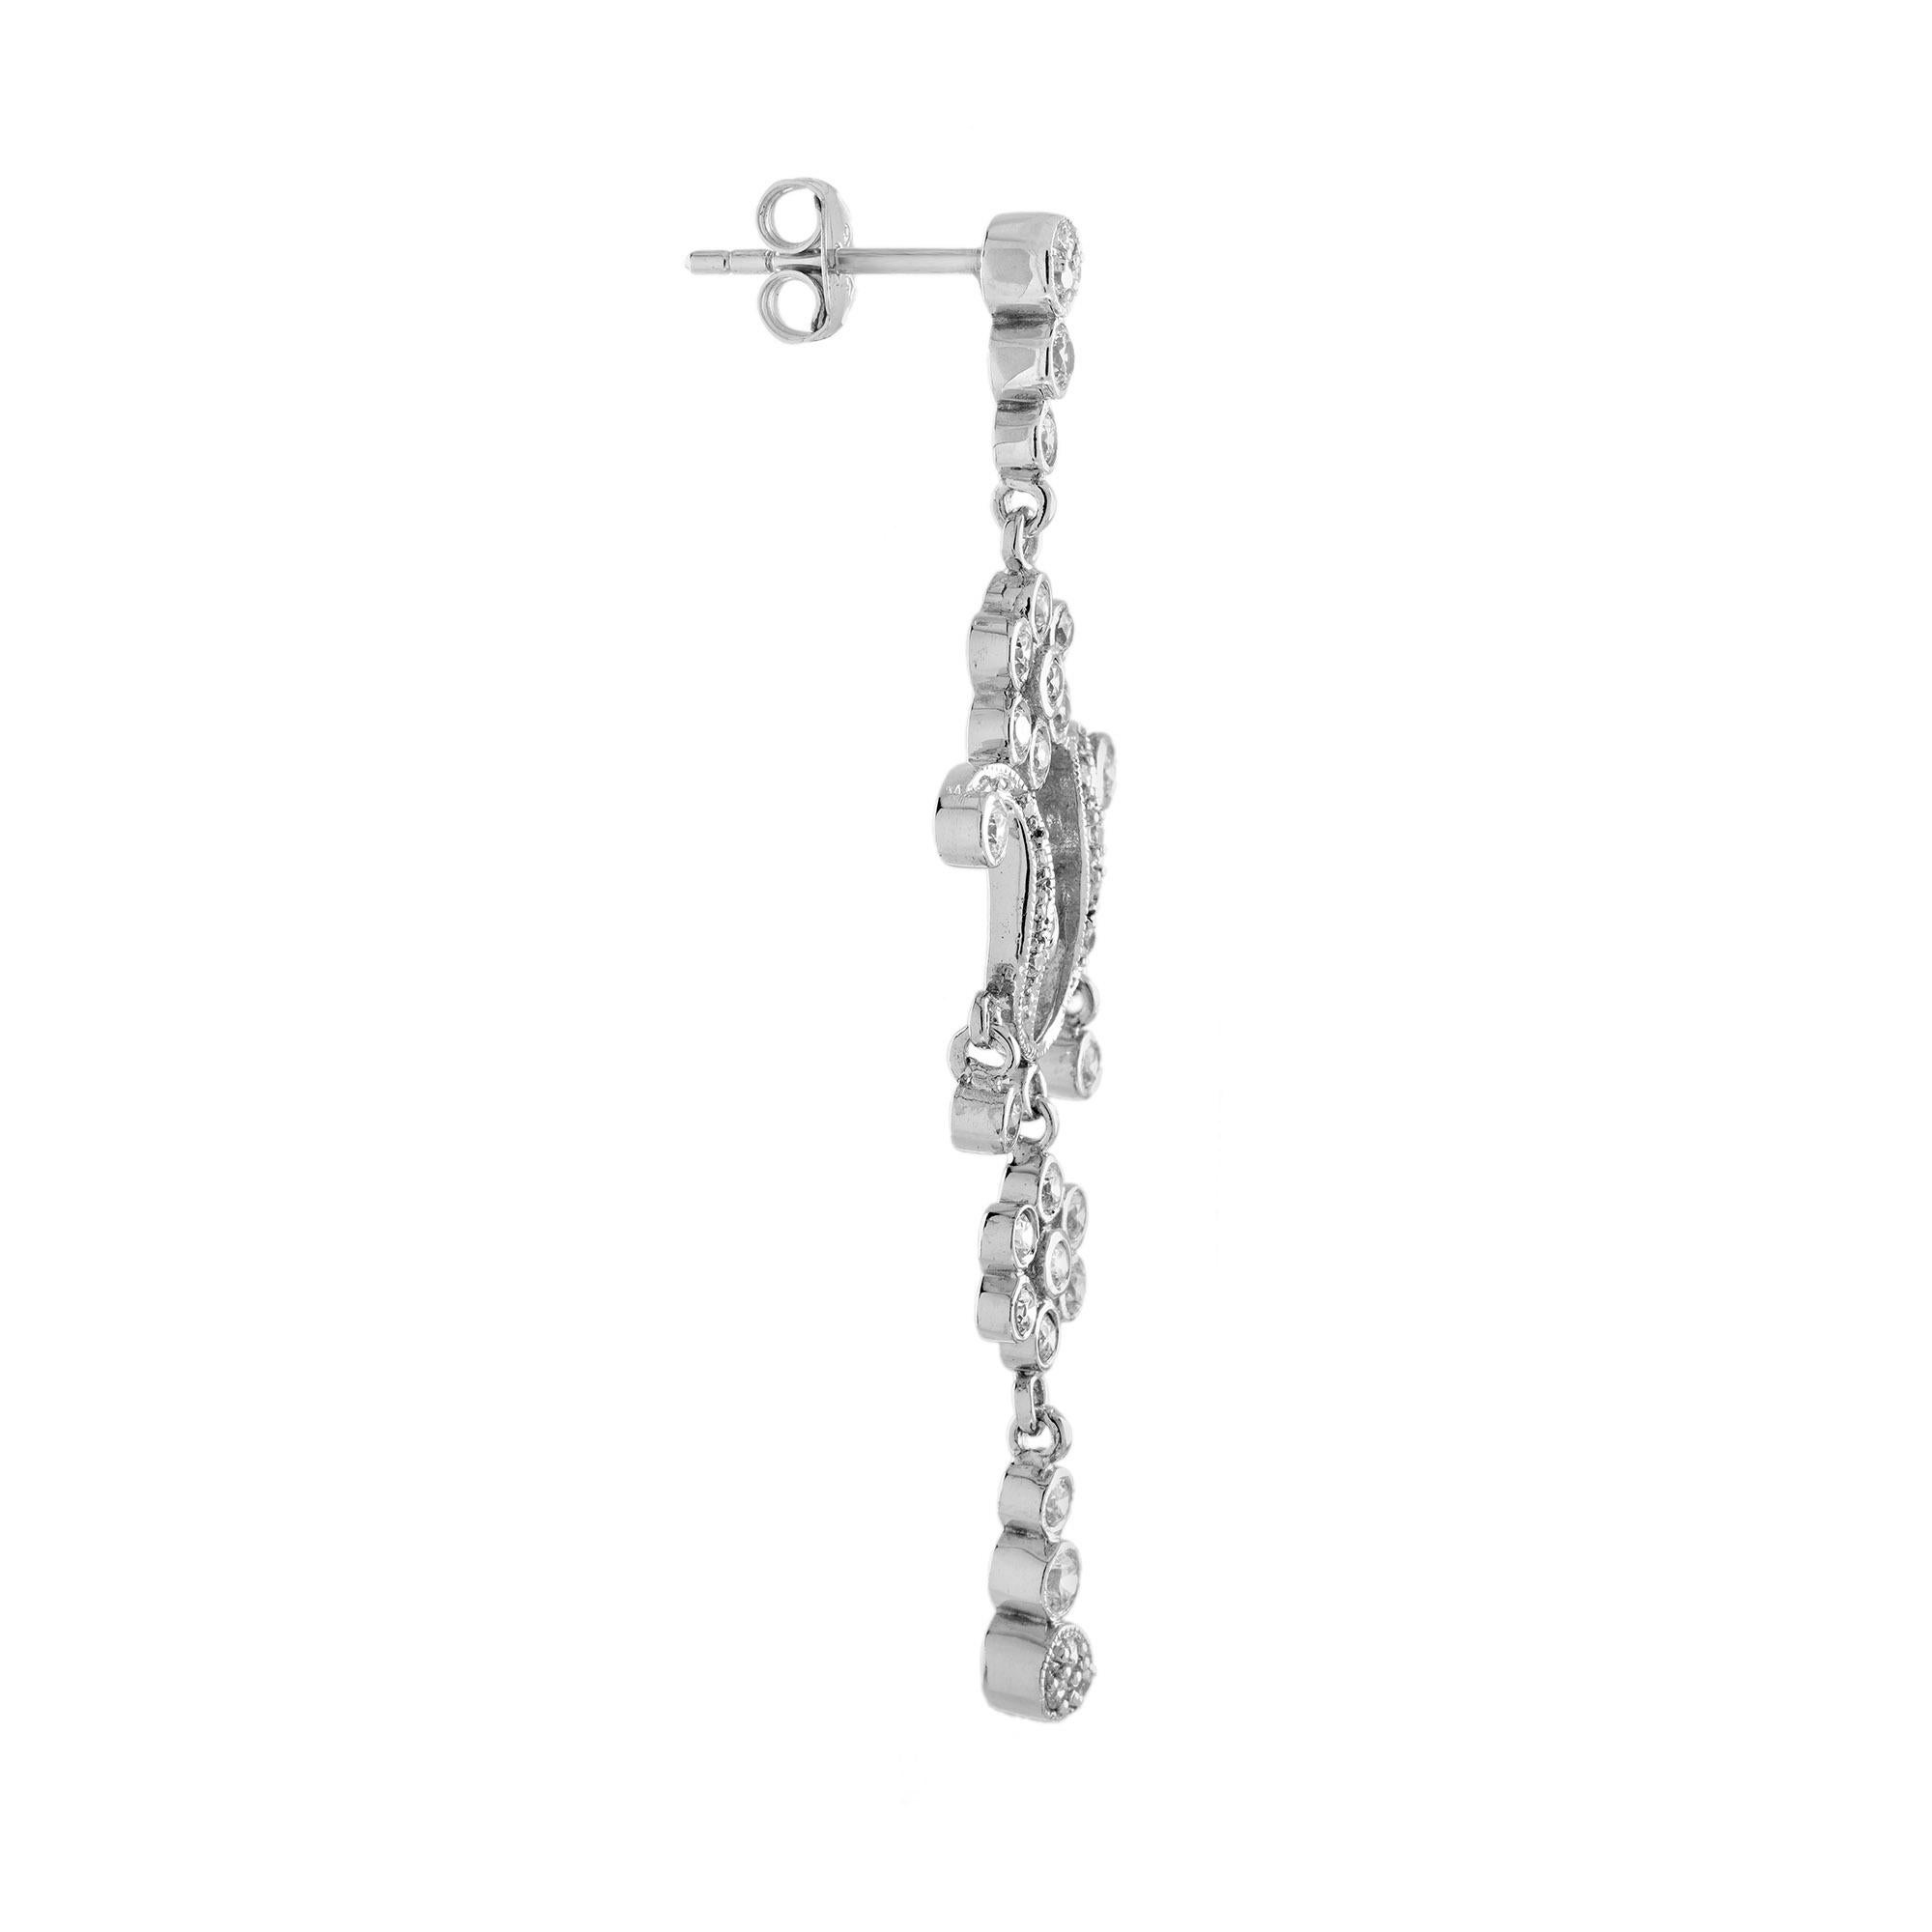 Round Cut 1.2 Ct. Diamond Edwardian Style Floral Dangle Earrings in 18K White Gold For Sale